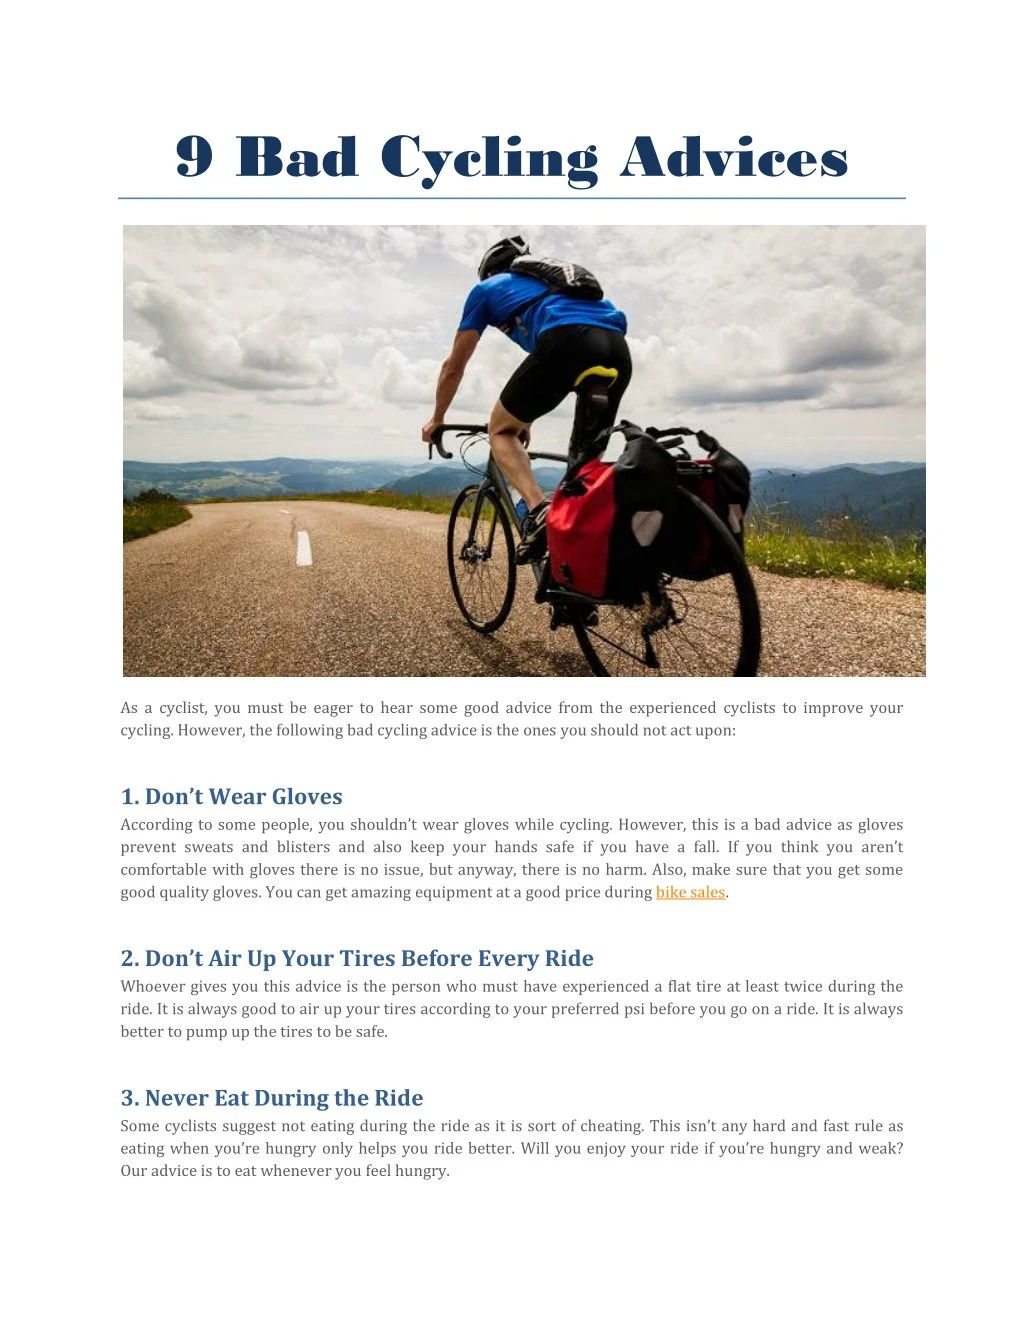 9 bad cycling advices